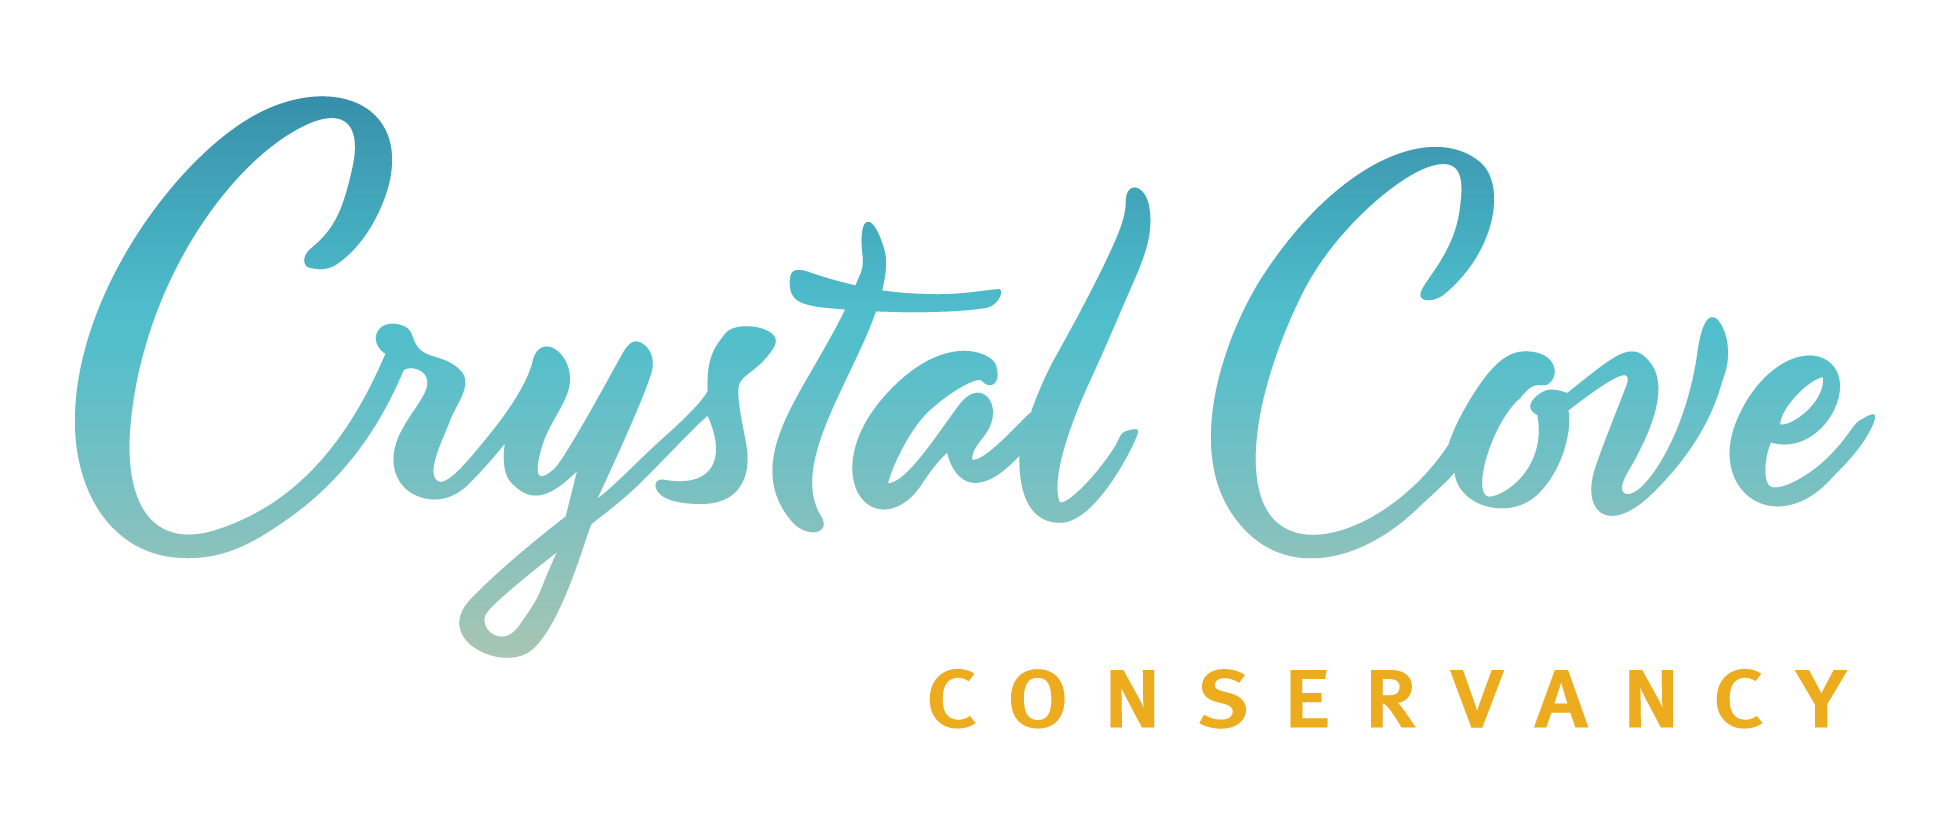 Crystal Cove Conservancy